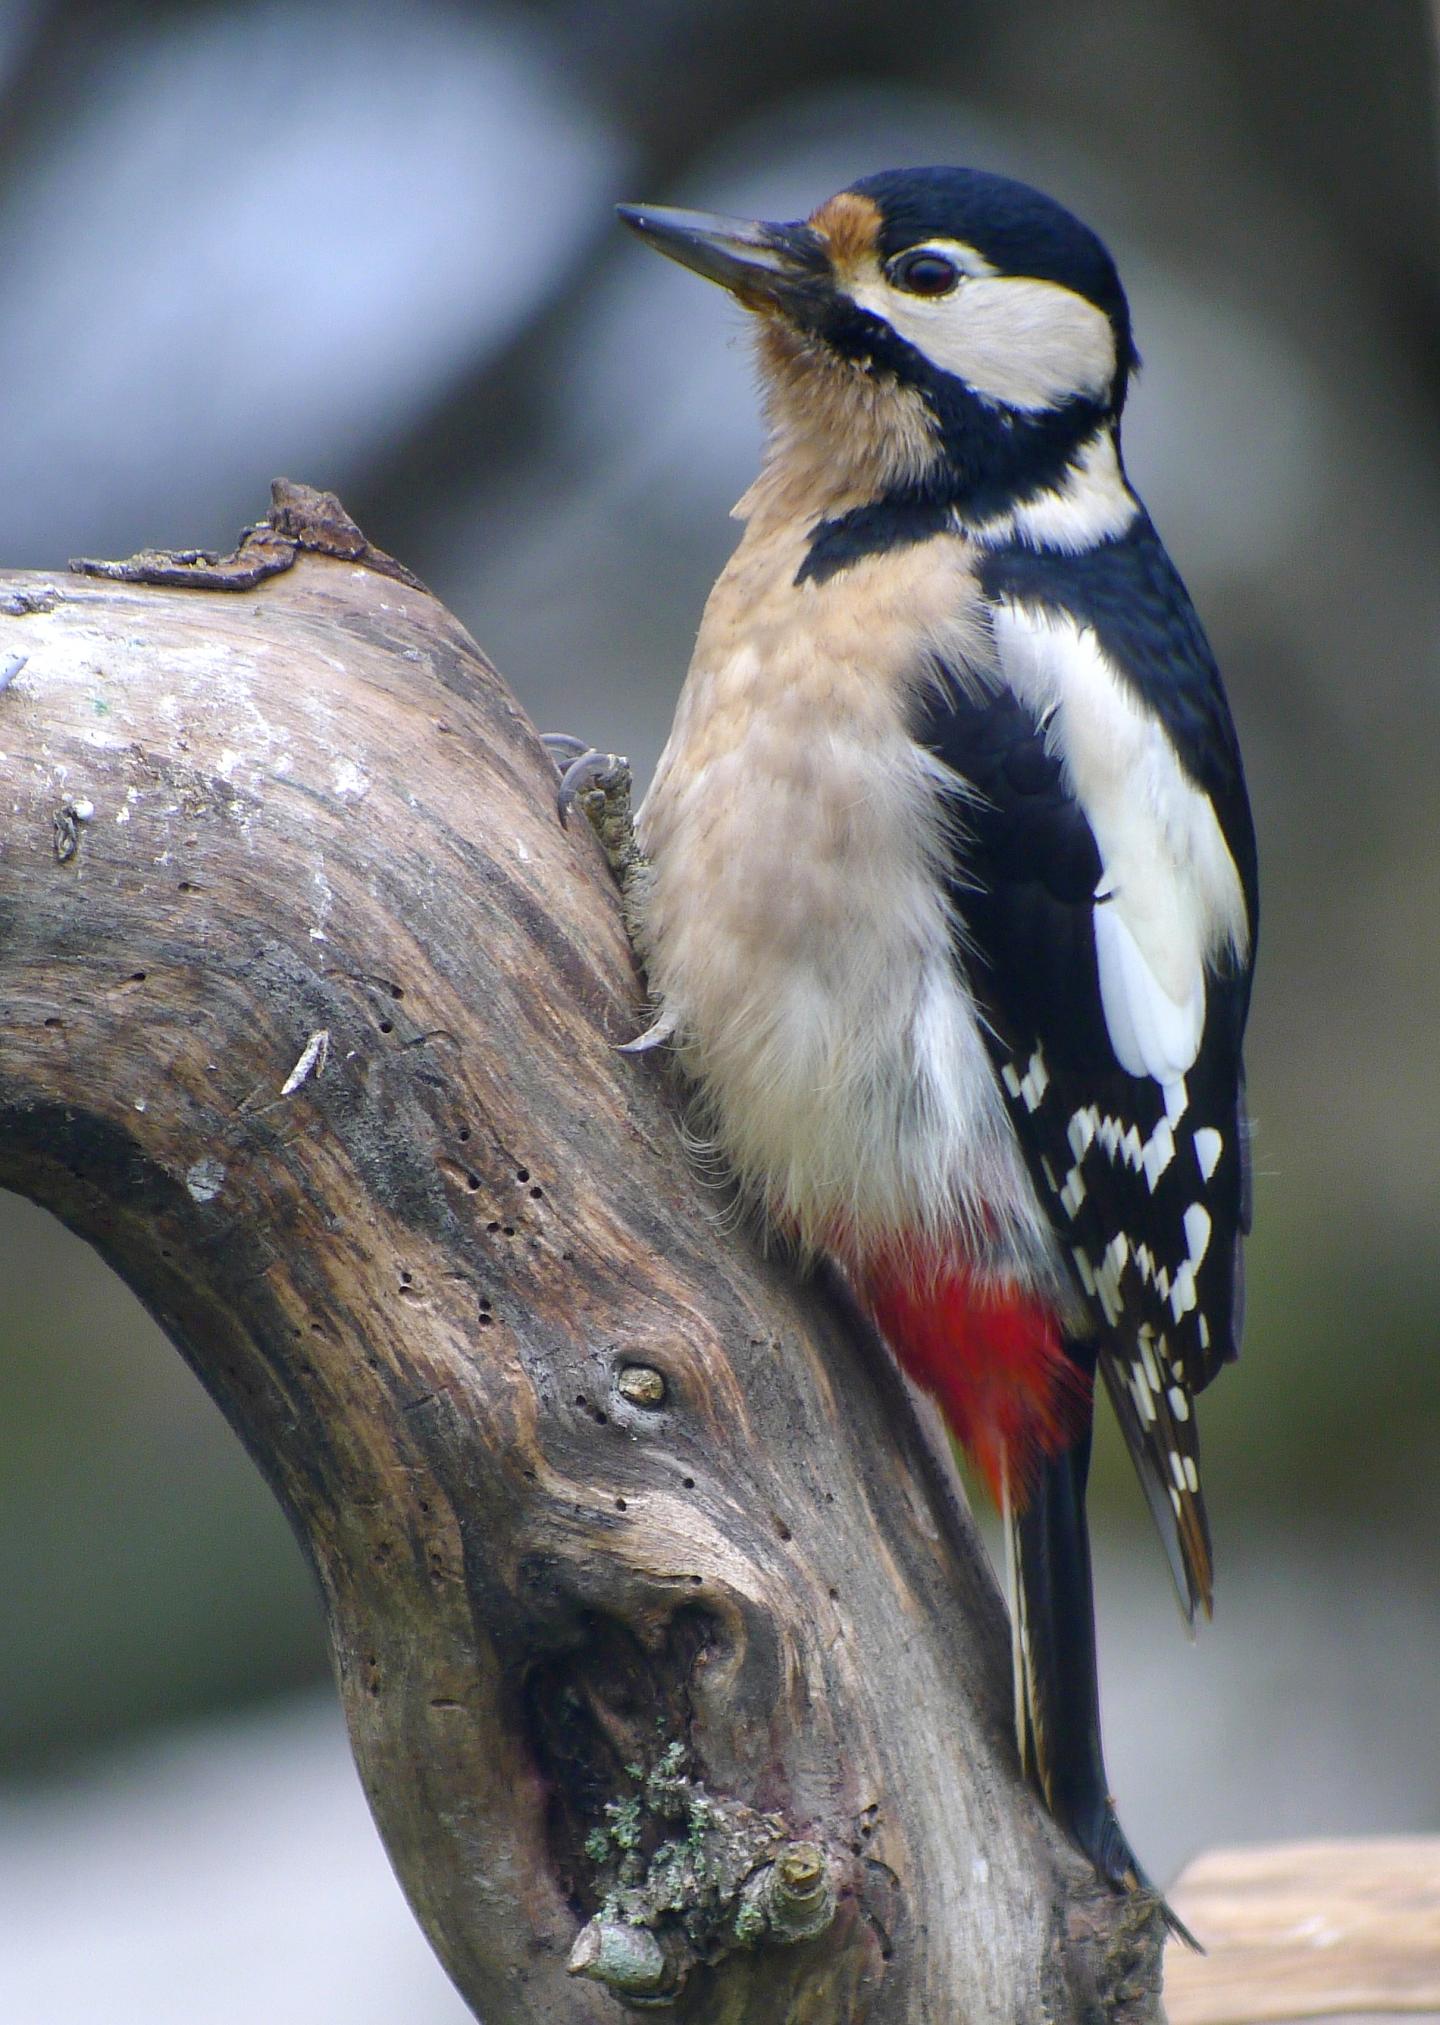 Great Spotted Woodpeckers May Recognize Each other Individually by Drumming Rhythms